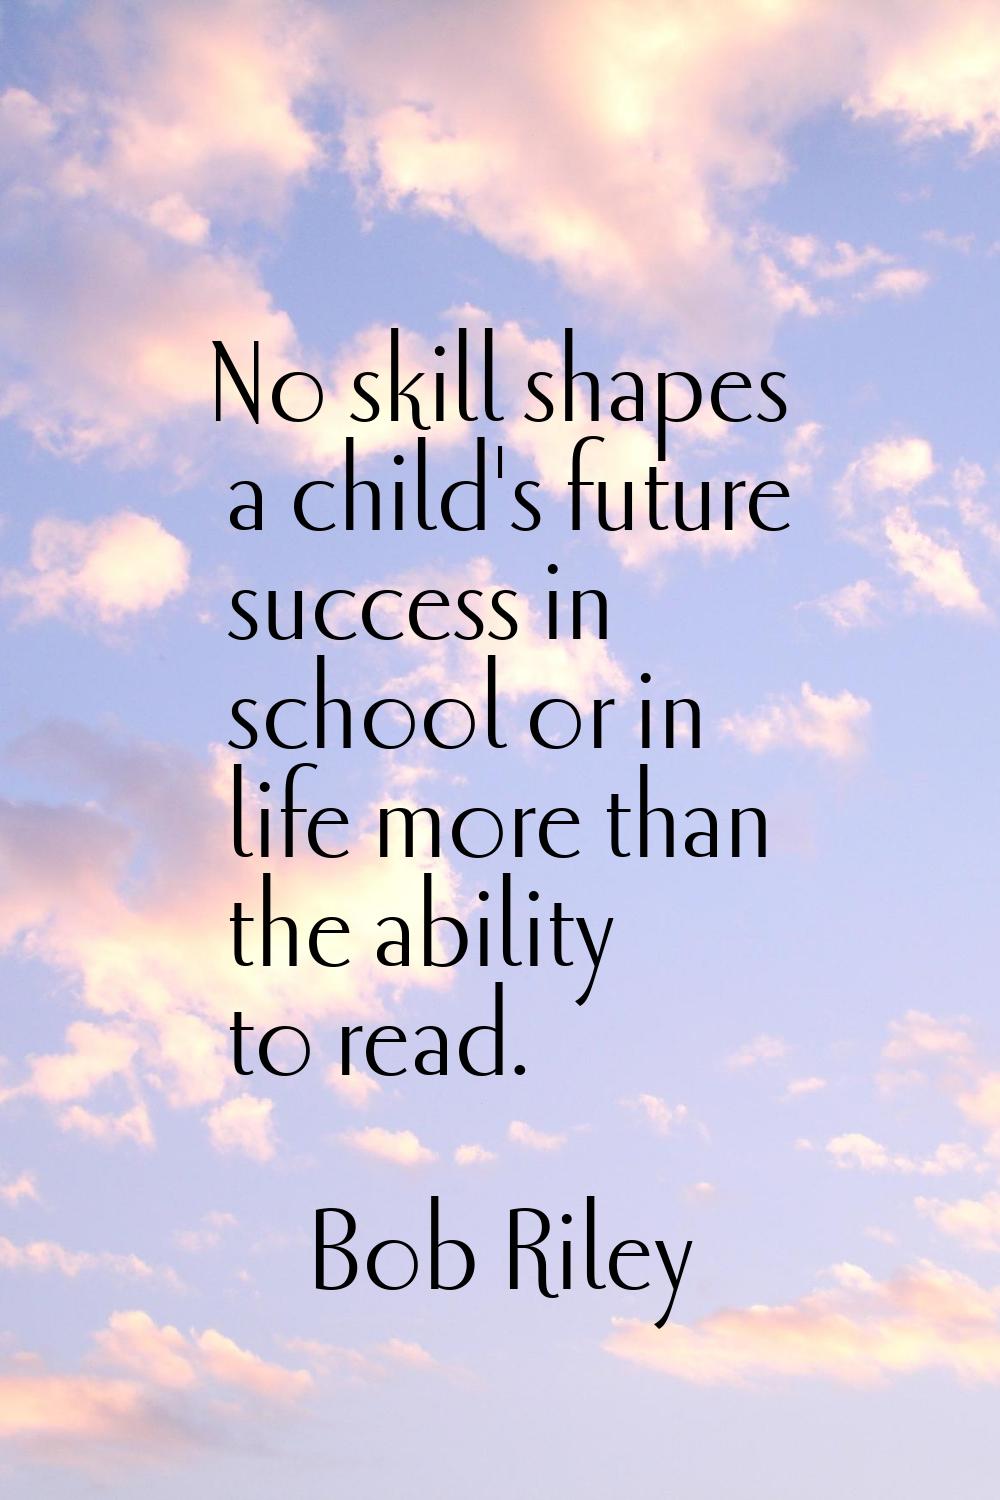 No skill shapes a child's future success in school or in life more than the ability to read.